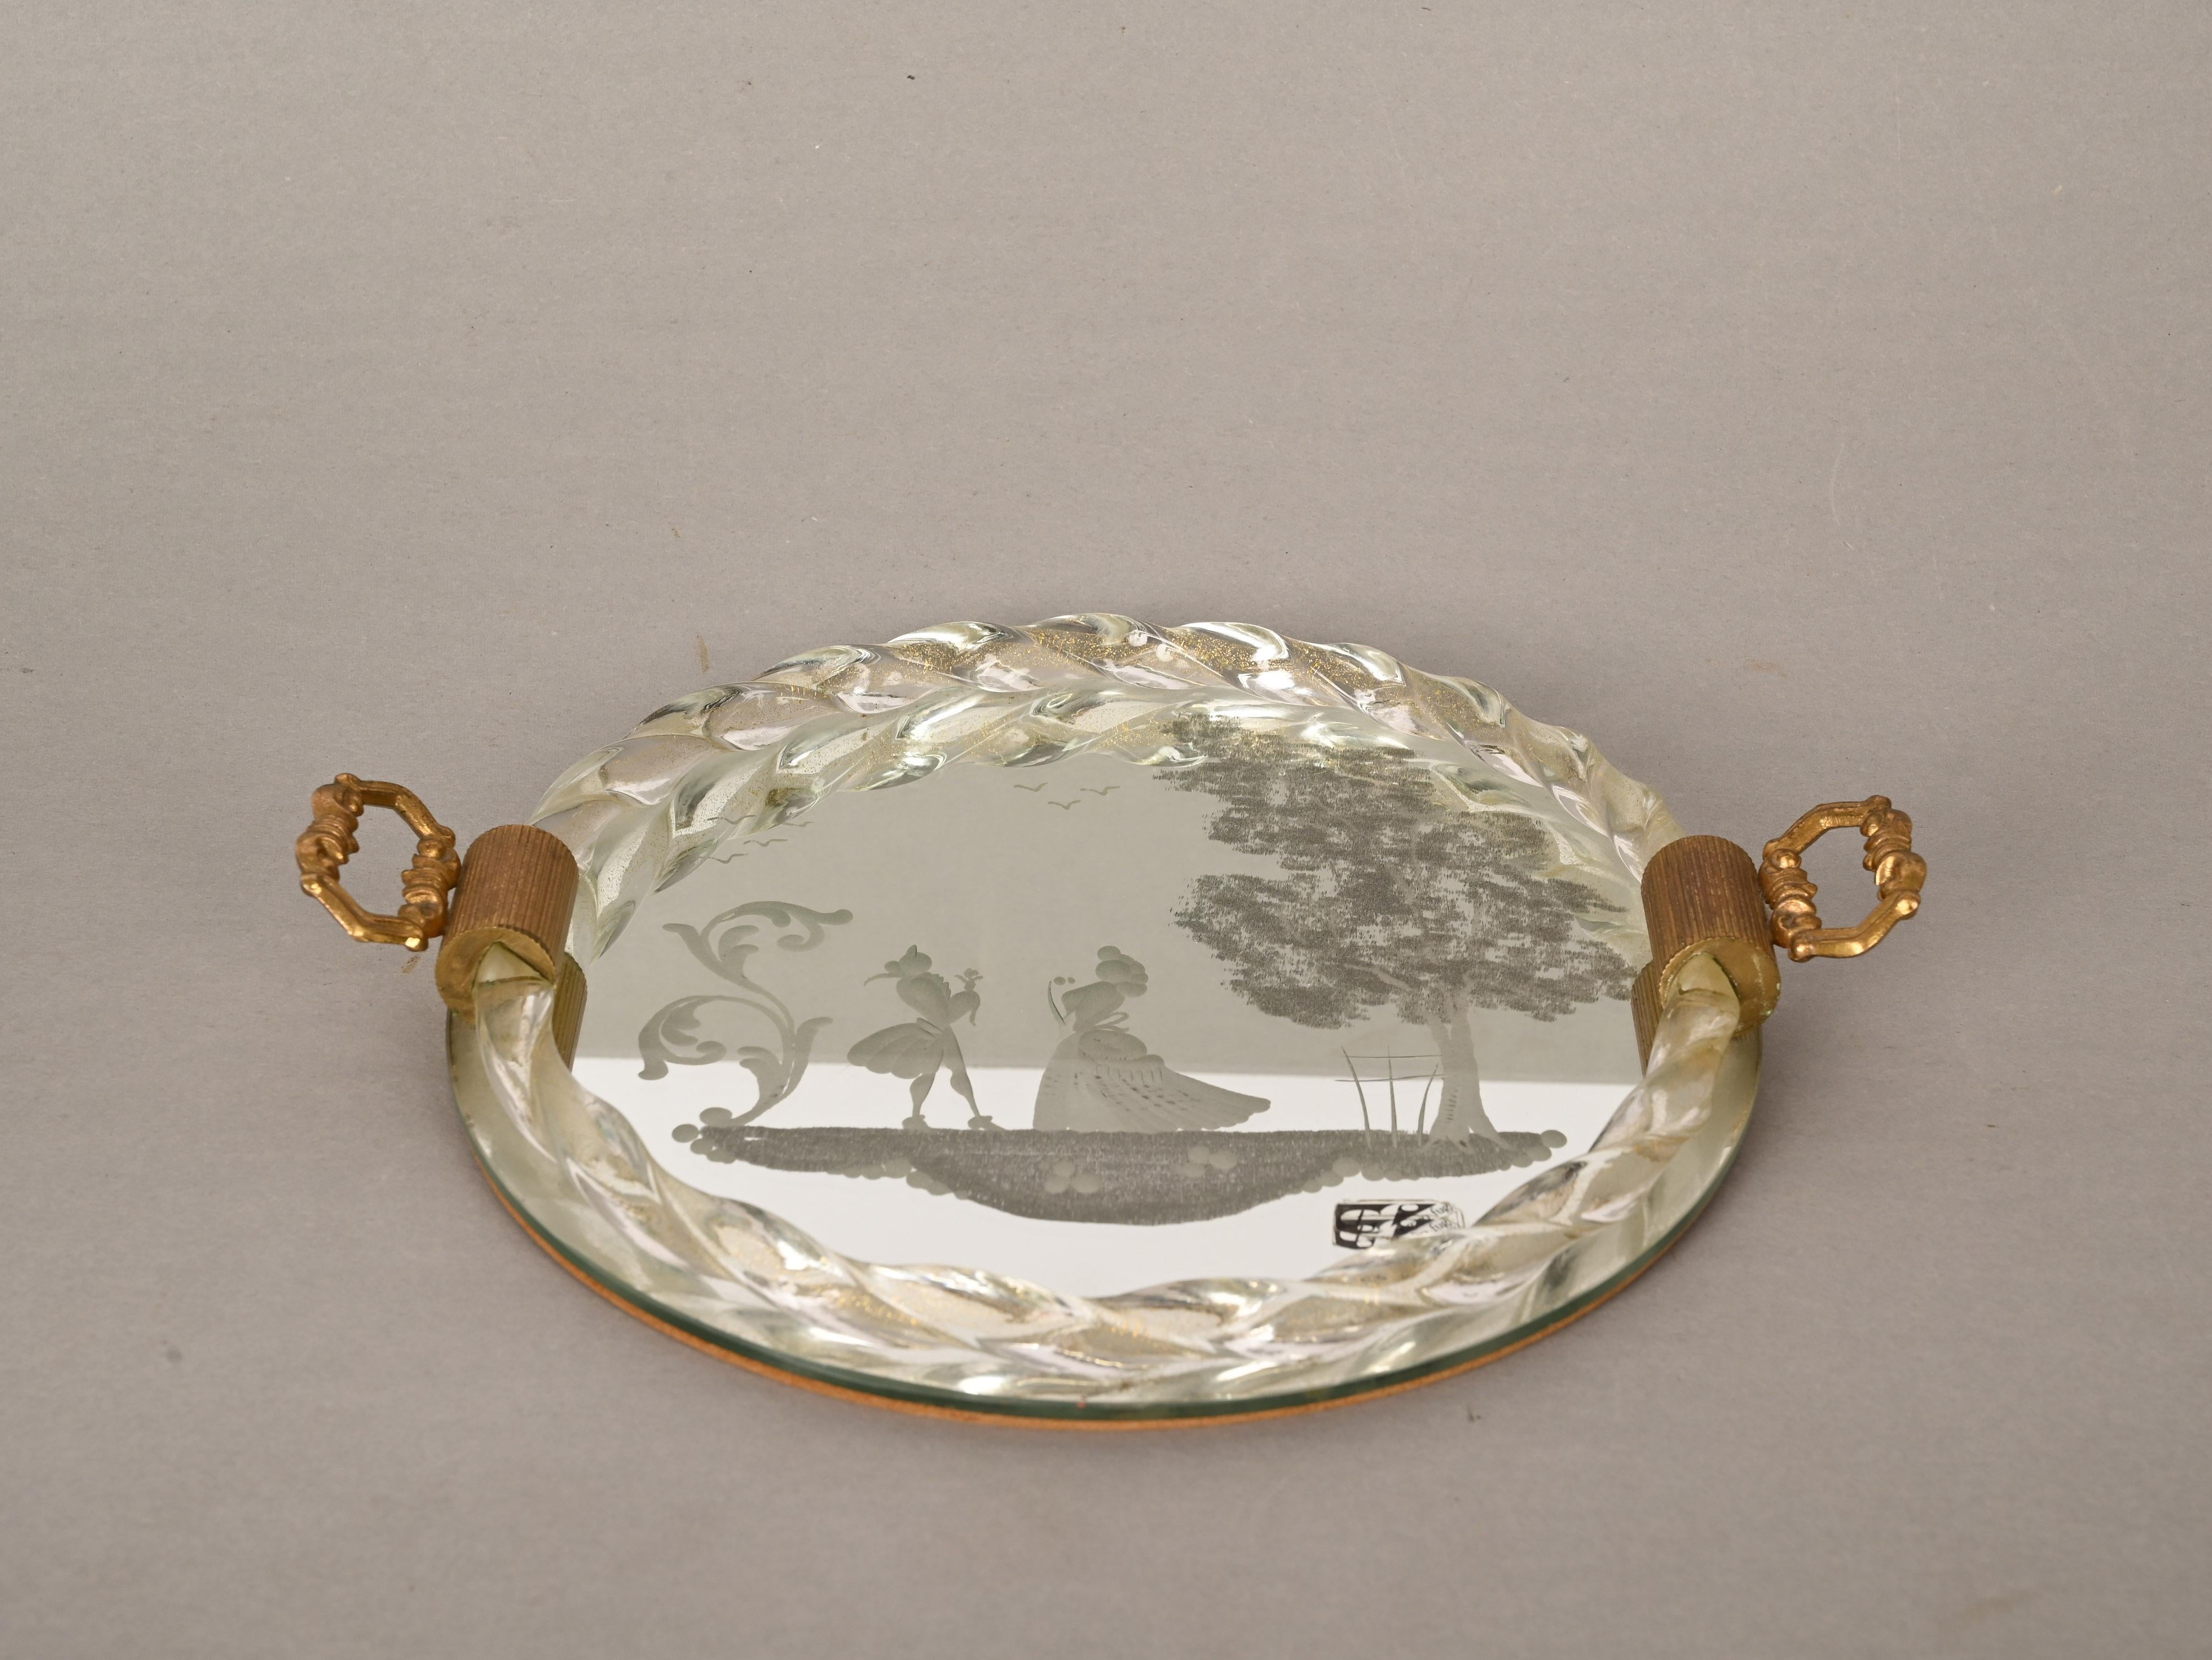 Ongaro e Fuga Gilded Engraved Mirror and Murano Glass Italian Serving Tray 1950s For Sale 8